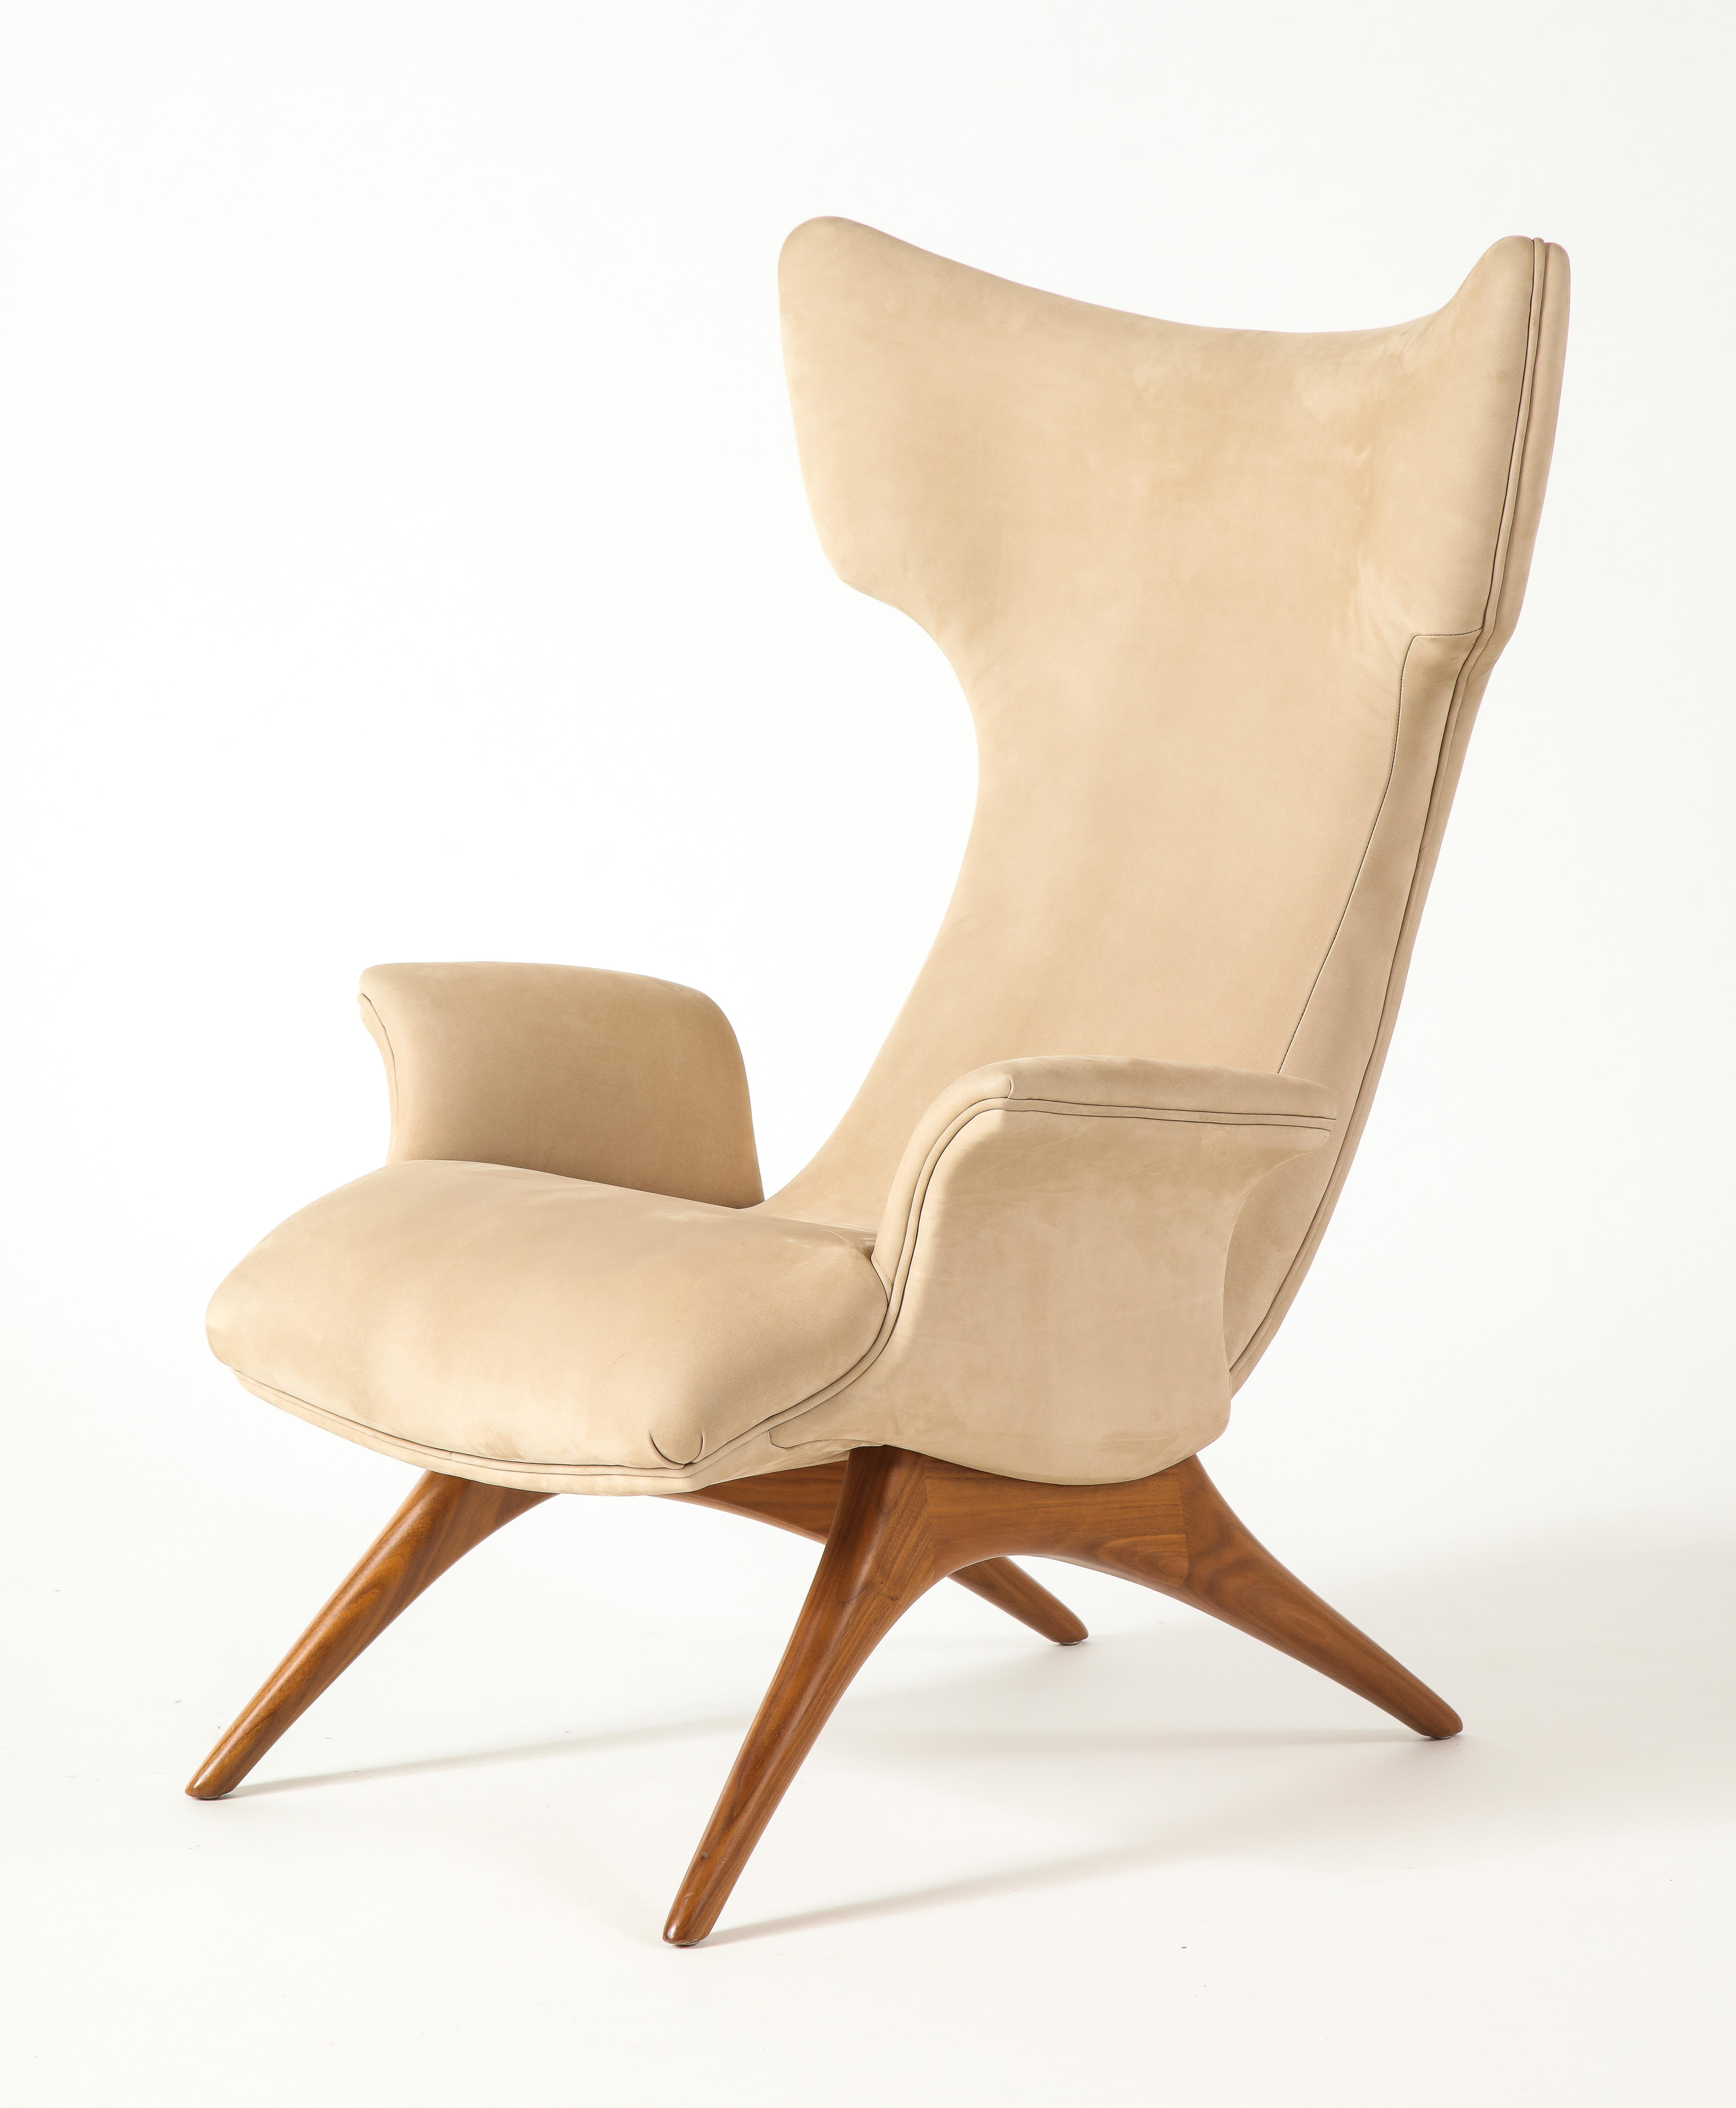 Modern Vladimir Kagan Ondine Chair with Sueded Leather Upholstery & Natural Walnut Base